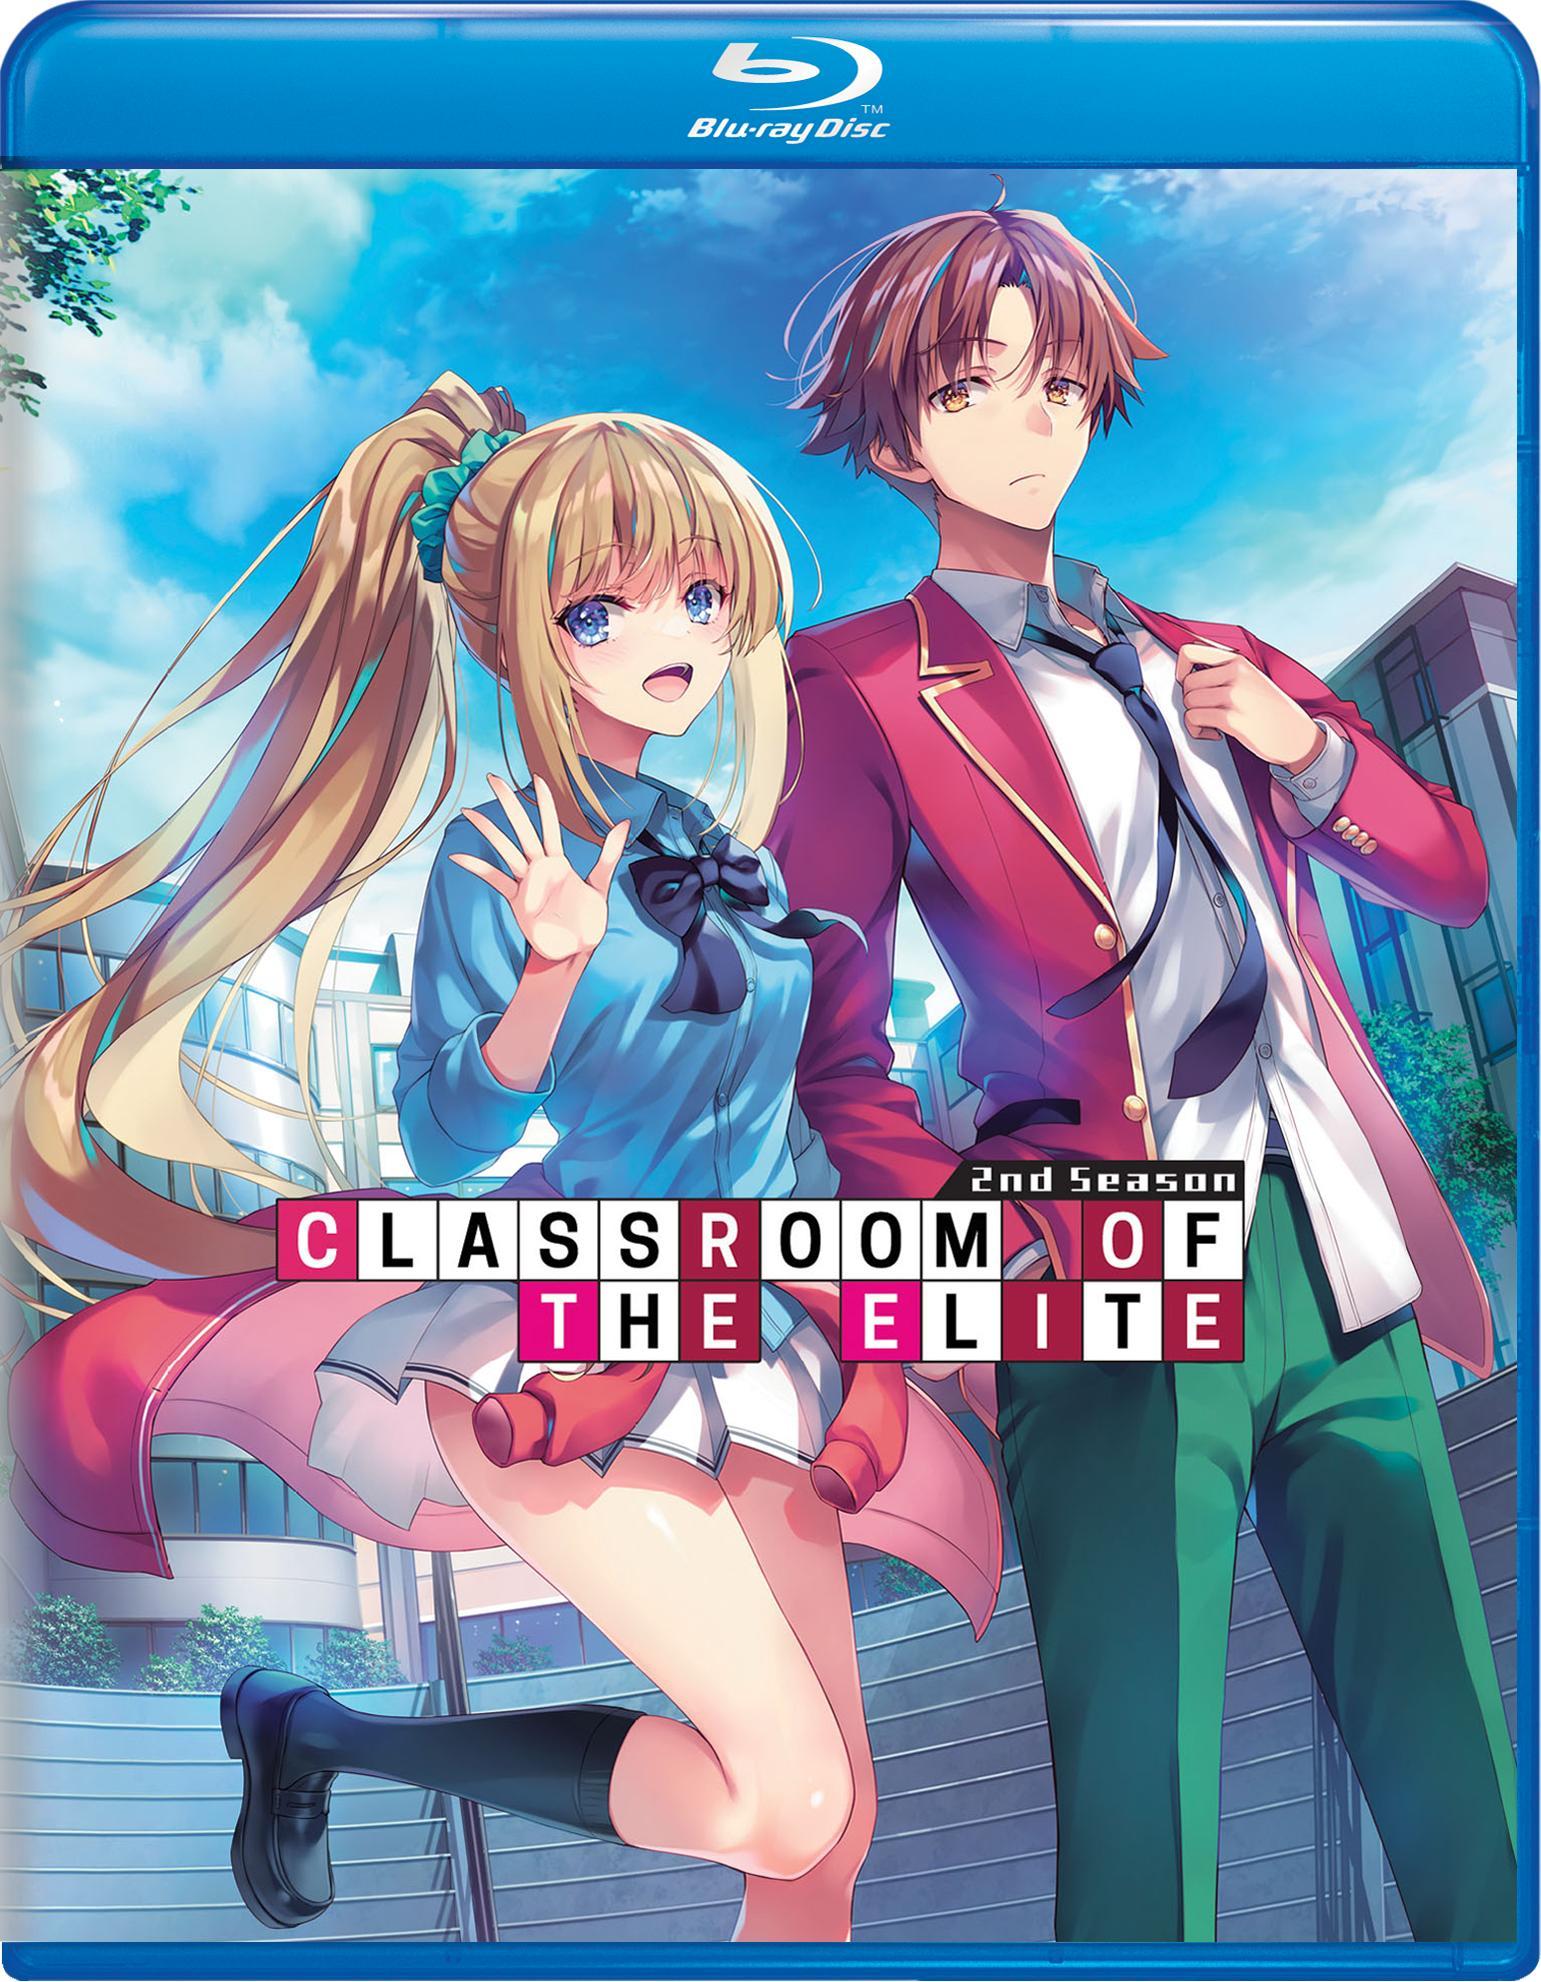 Classroom Of The Elite: 2nd Season Blu-ray Volume 1 to be released on  October 26, 2022. Pre-order bonus: A3 clear poster drawn by Tomoseshunsaku  : r/ClassroomOfTheElite